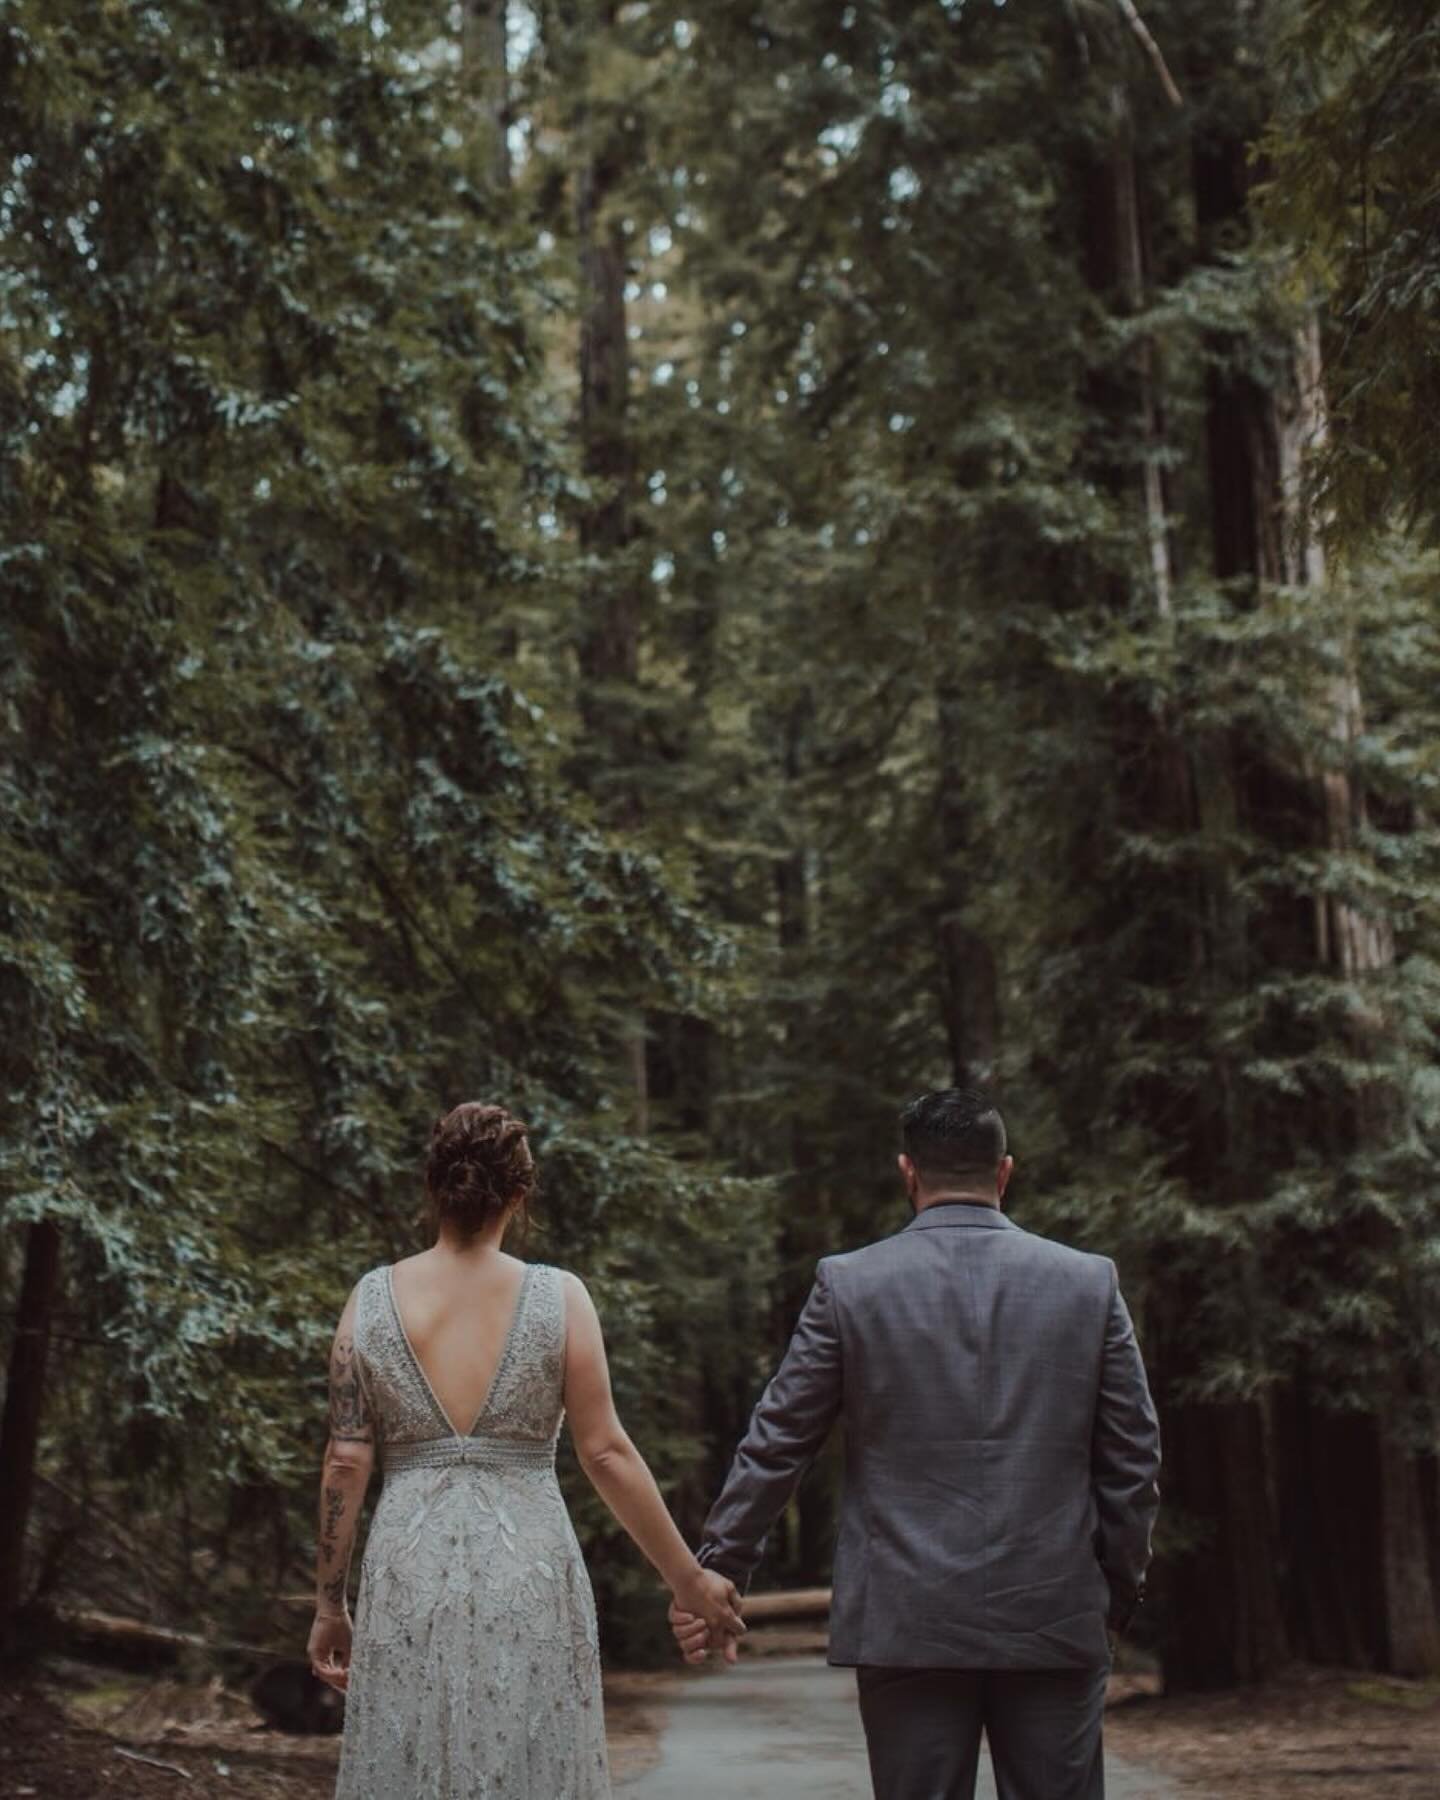 More micro weddings under the redwoods and in my favorite river town, please. 

Kris is one of the sweetest humans and a dear friend, and when she asked me to shoot her micro wedding in the Russian River redwoods I gave her a very quick and effusive,